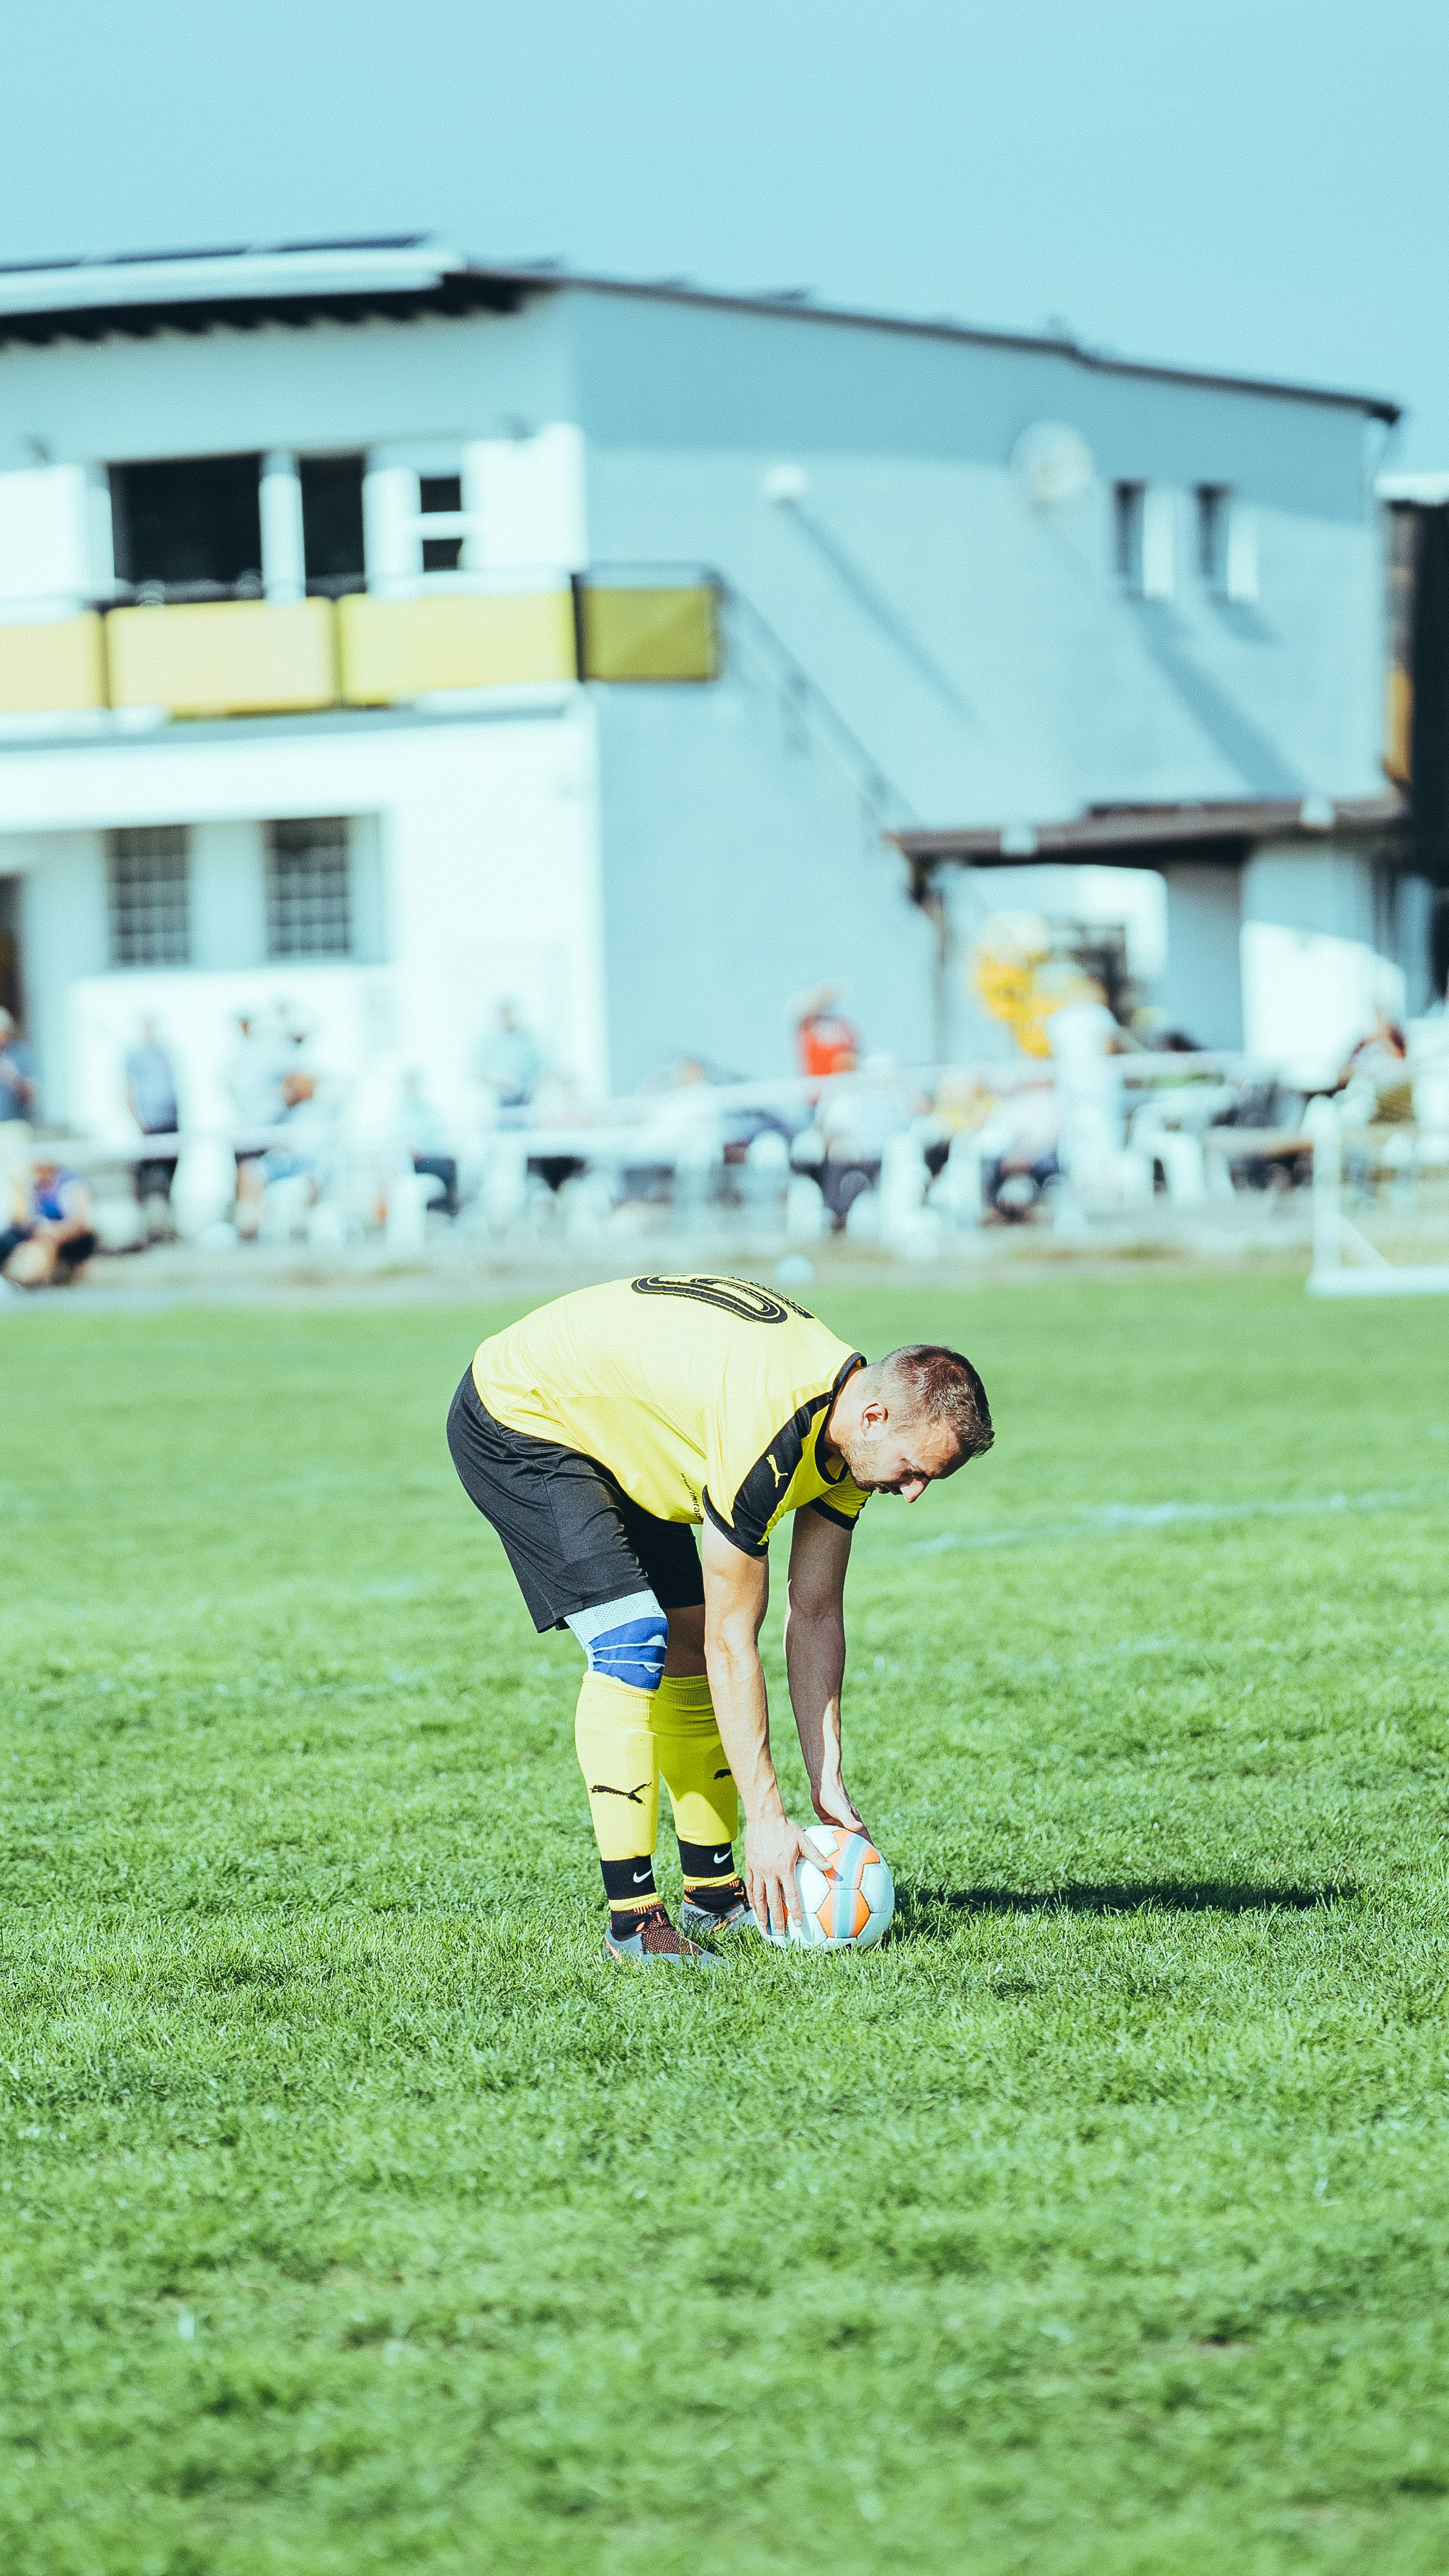 man in yellow shirt and black shorts playing soccer during daytime